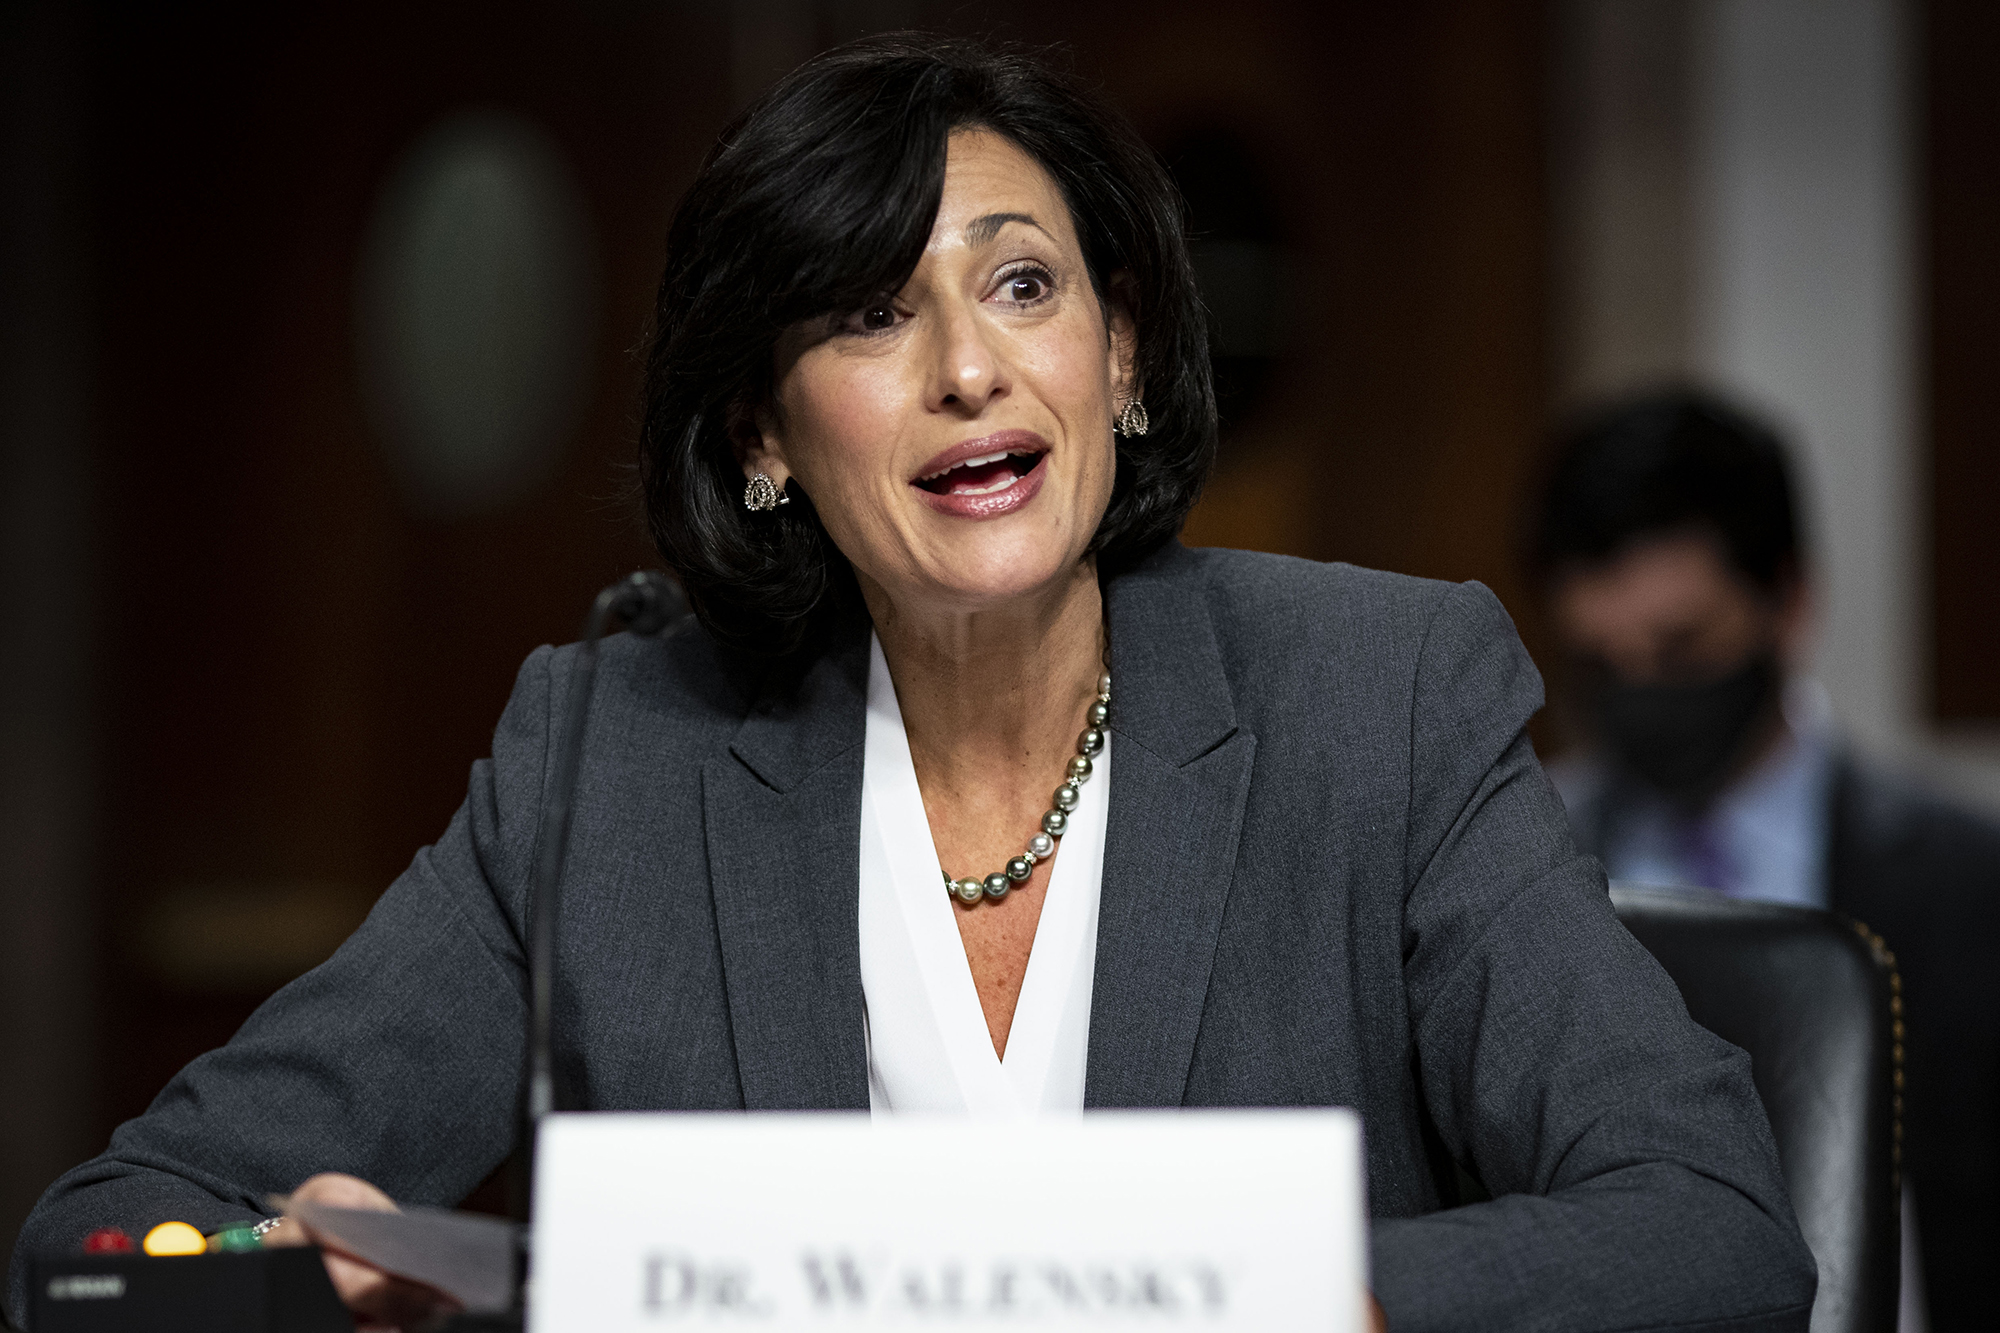 Rochelle Walensky, director of the U.S. Centers for Disease Control and Prevention (CDC), speaks during a Senate Health, Education, Labor, and Pensions Committee hearing in Washington, D.C., U.S., on Thursday, November 4th, 2021. 